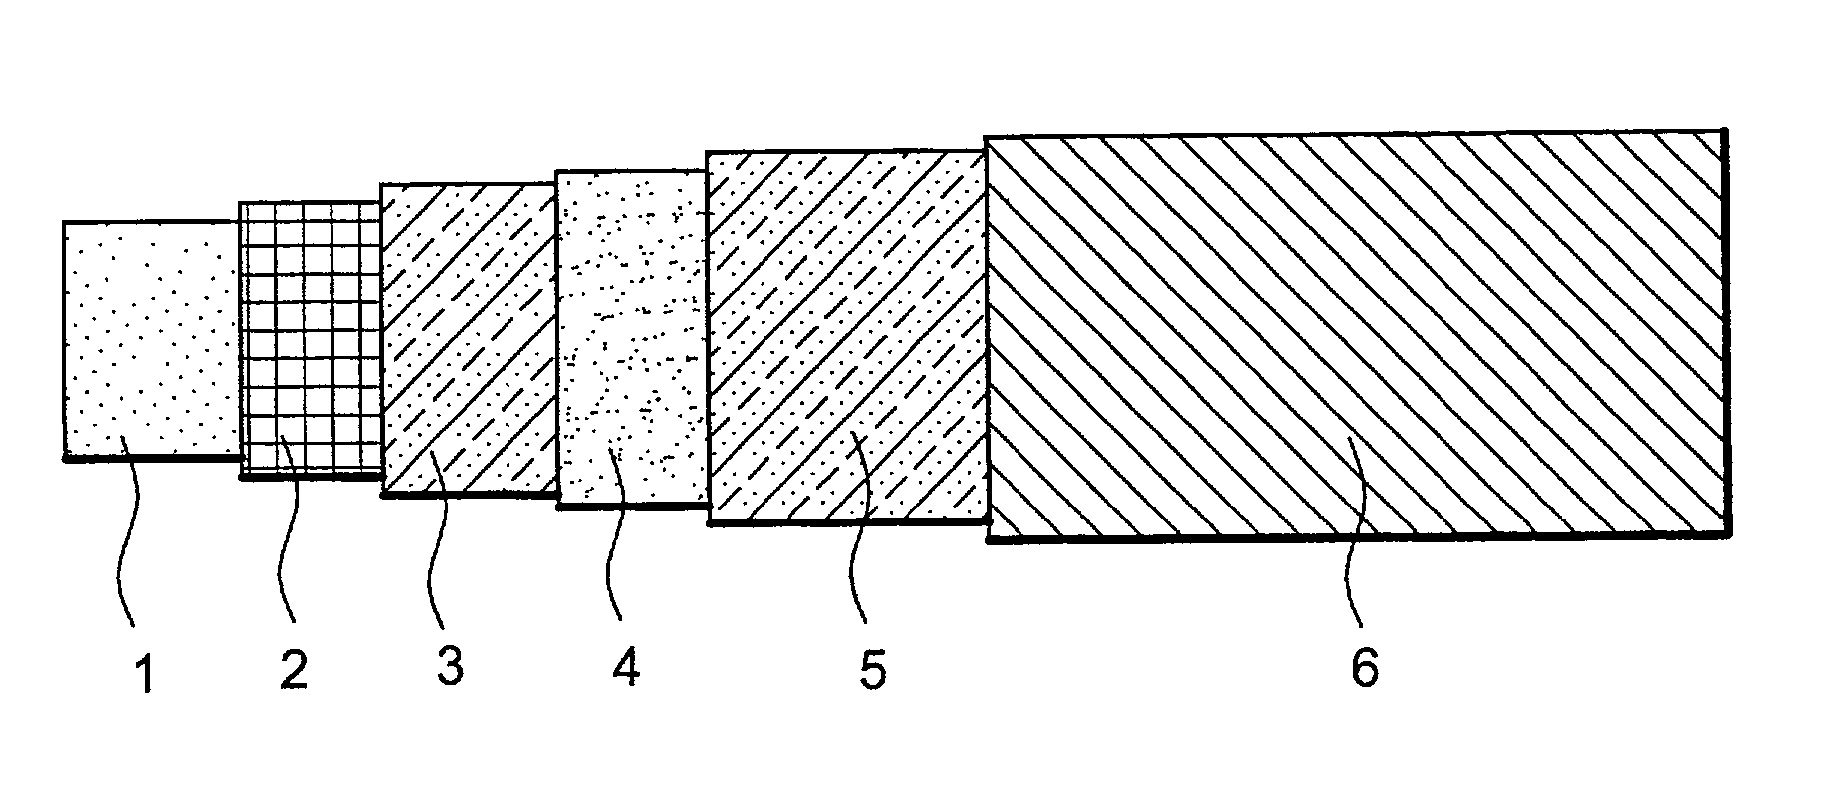 Process for making a fuel cell with cylindrical geometry